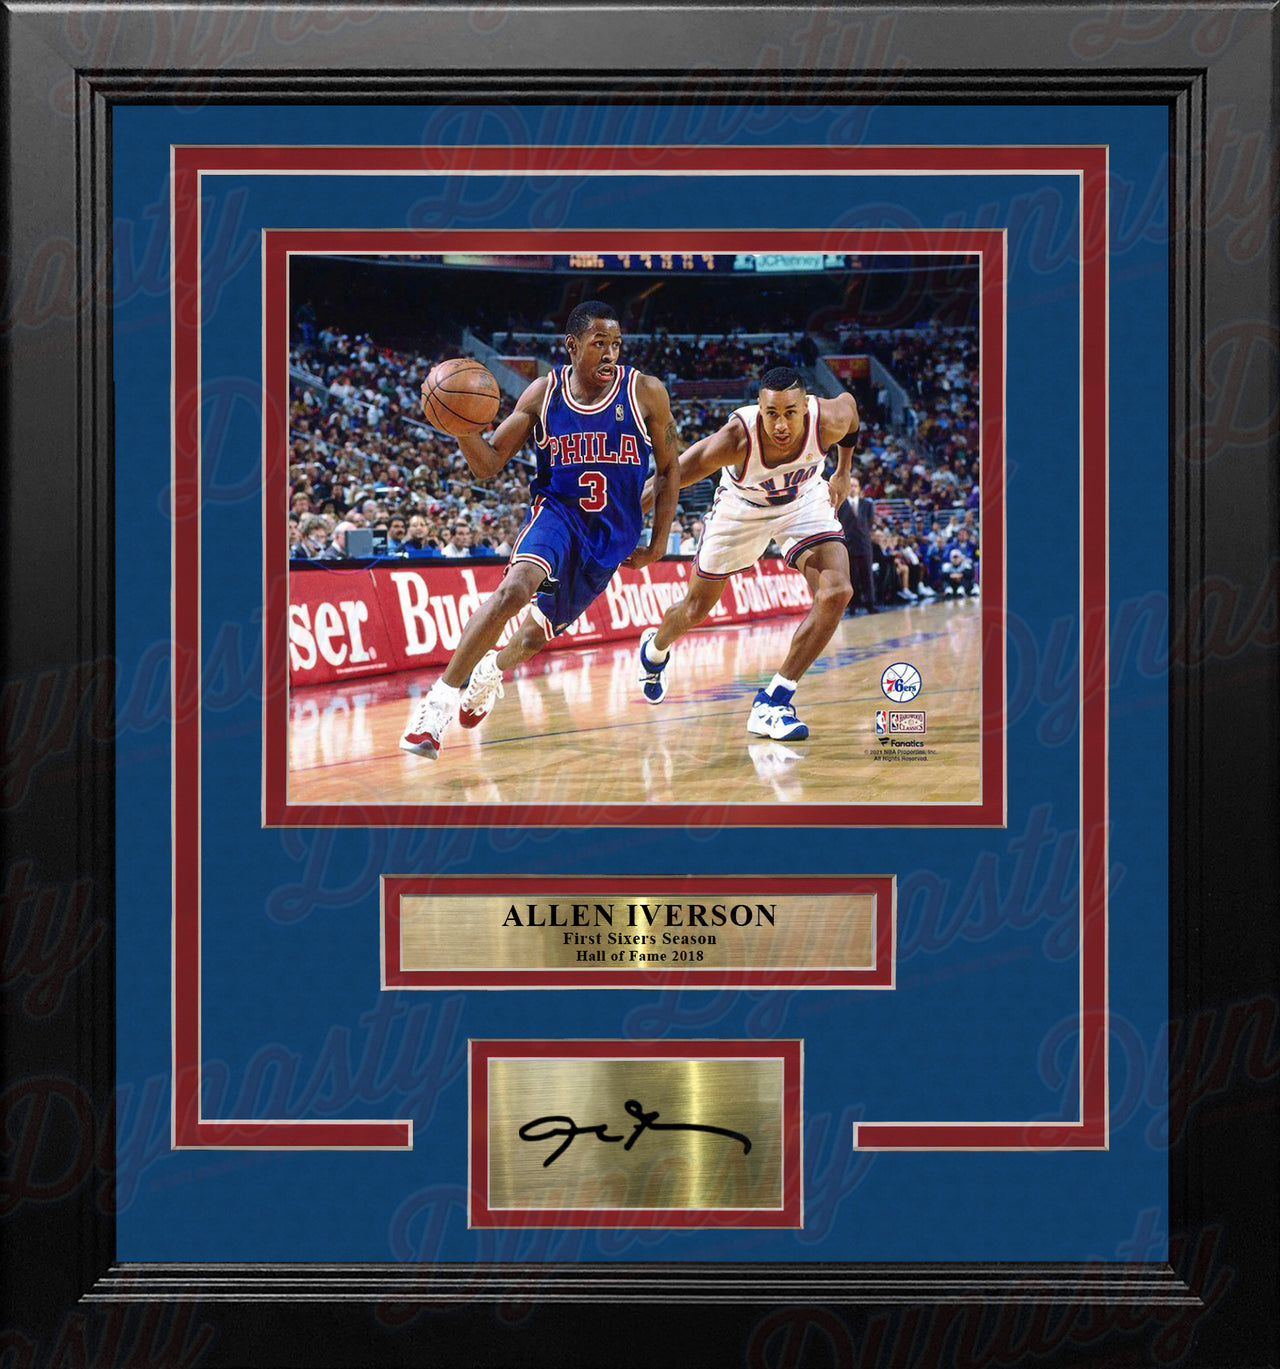 Allen Iverson Rookie Year Philadelphia 76ers 8x10 Framed Basketball Photo with Engraved Autograph - Dynasty Sports & Framing 